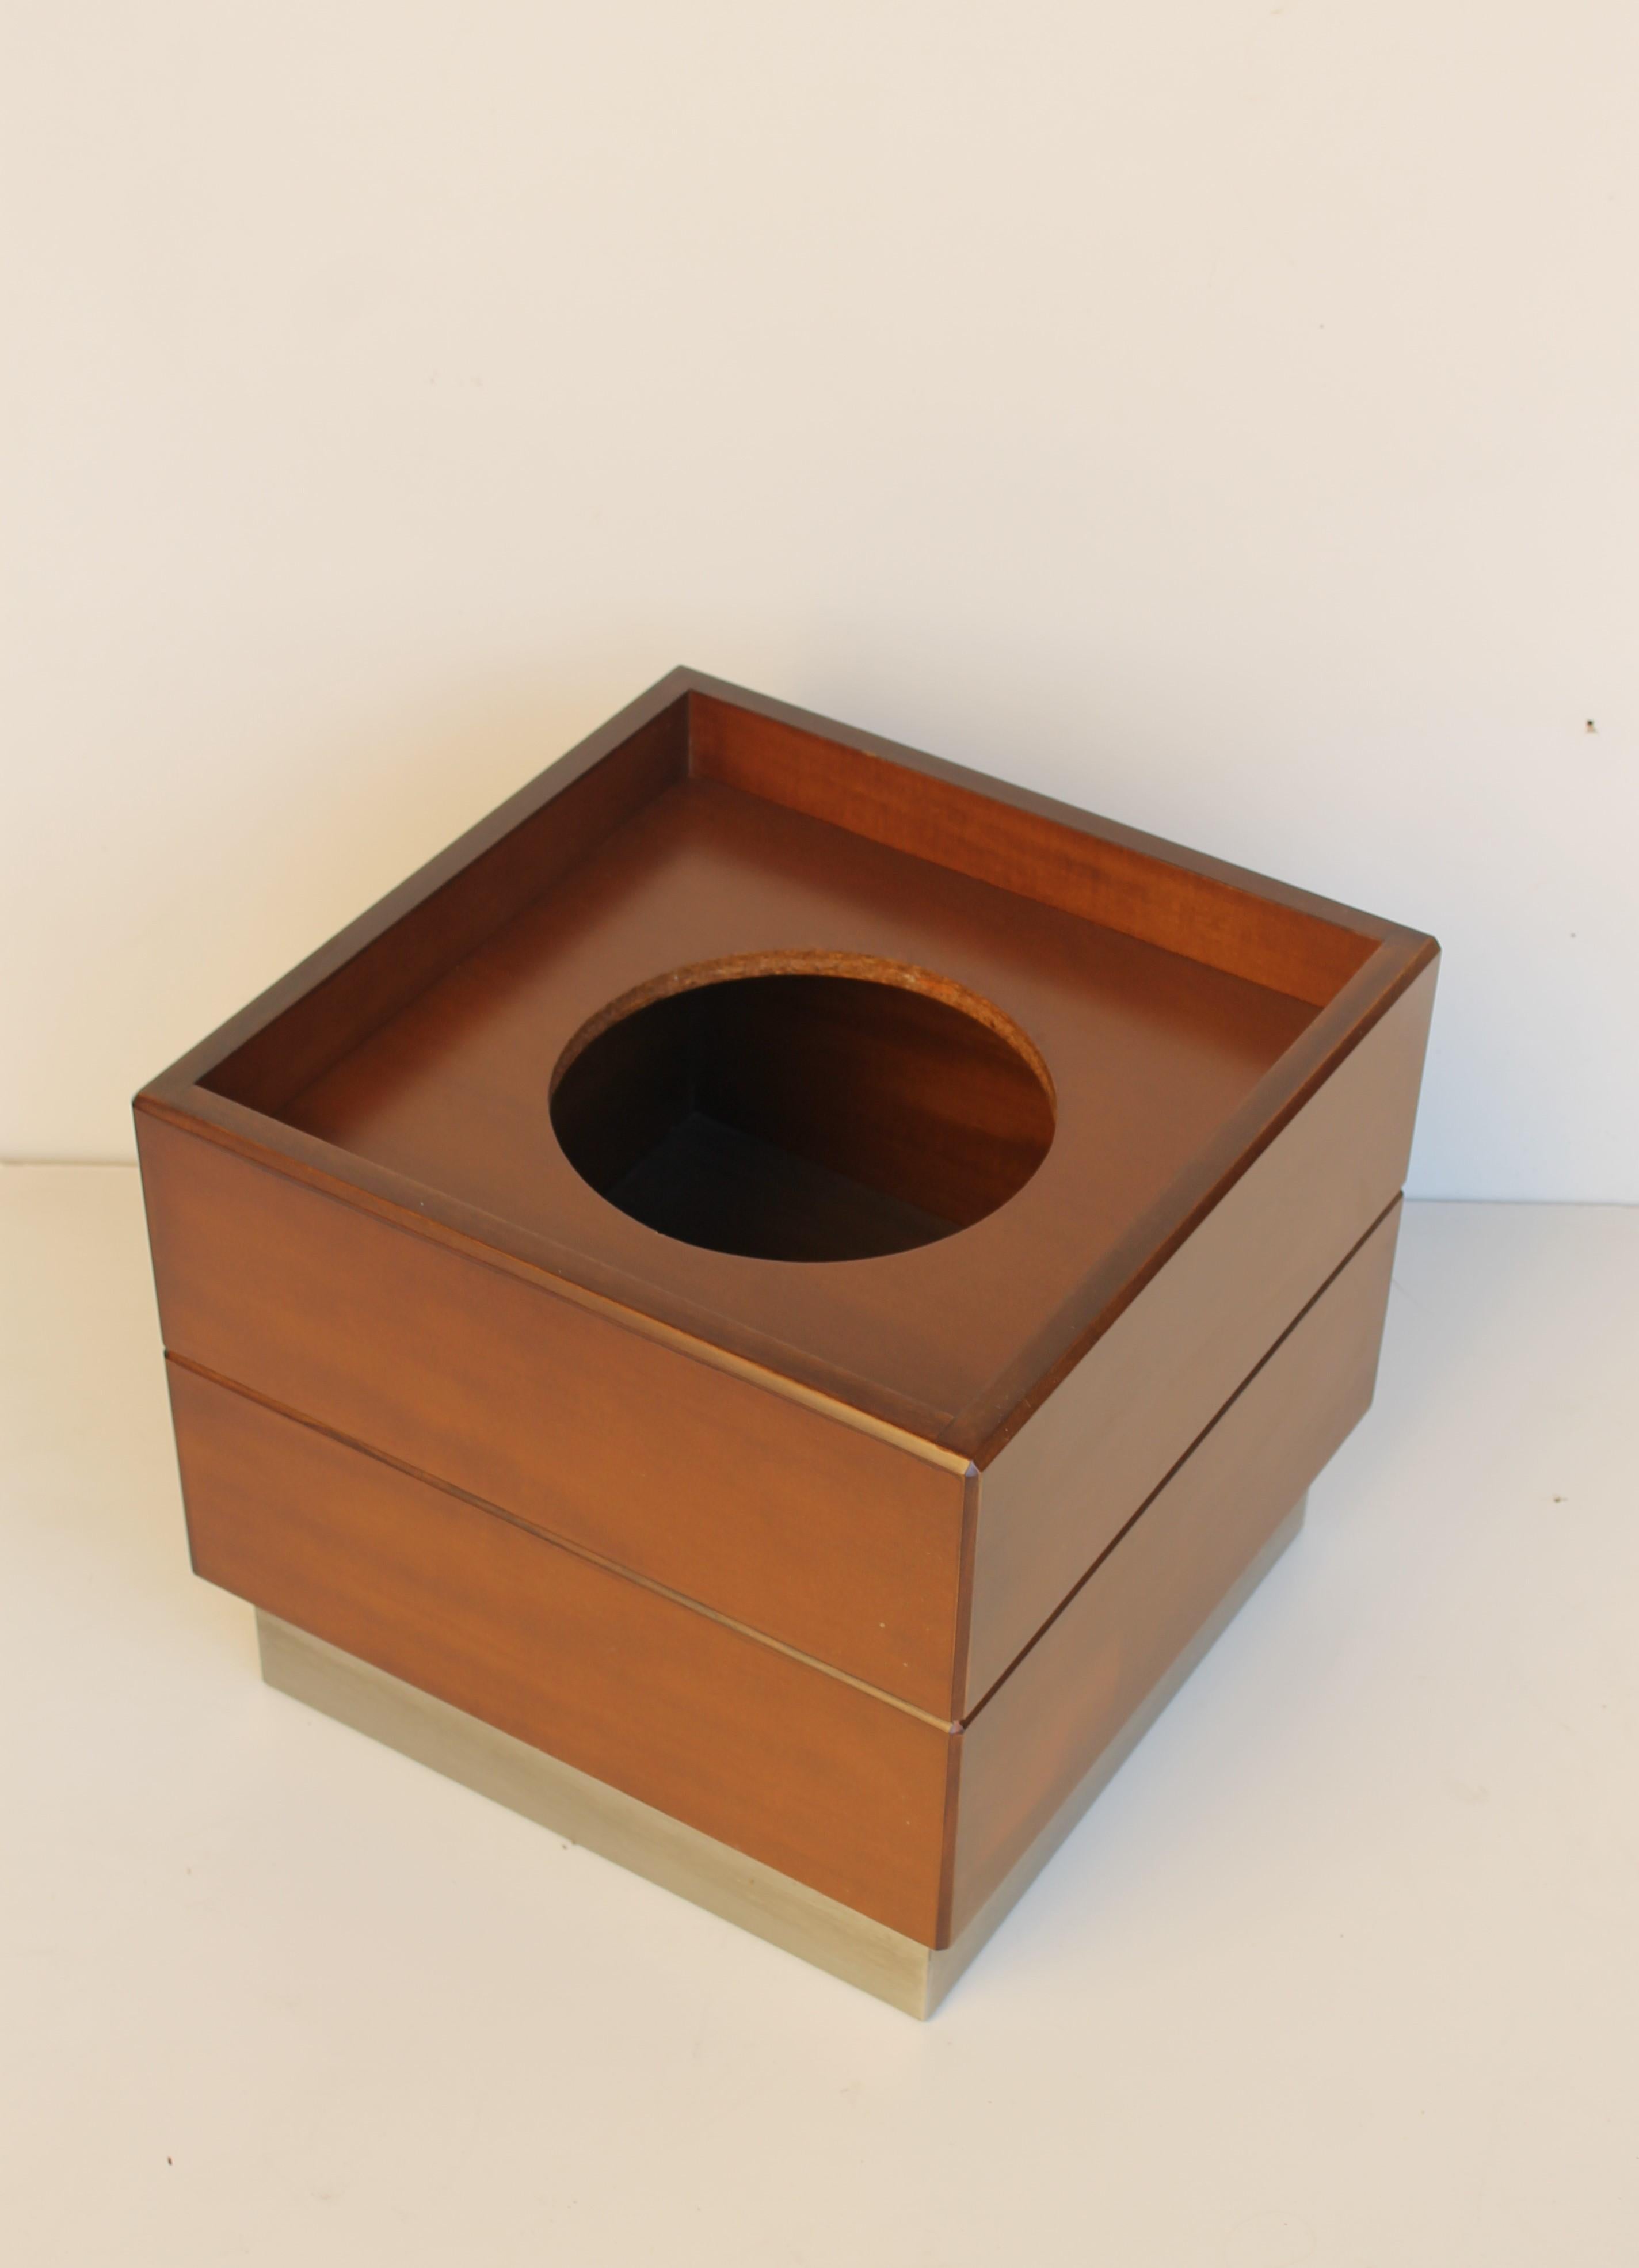 Forma Nova 1978 Rosewood and Metal Planter In Good Condition For Sale In Sacile, PN